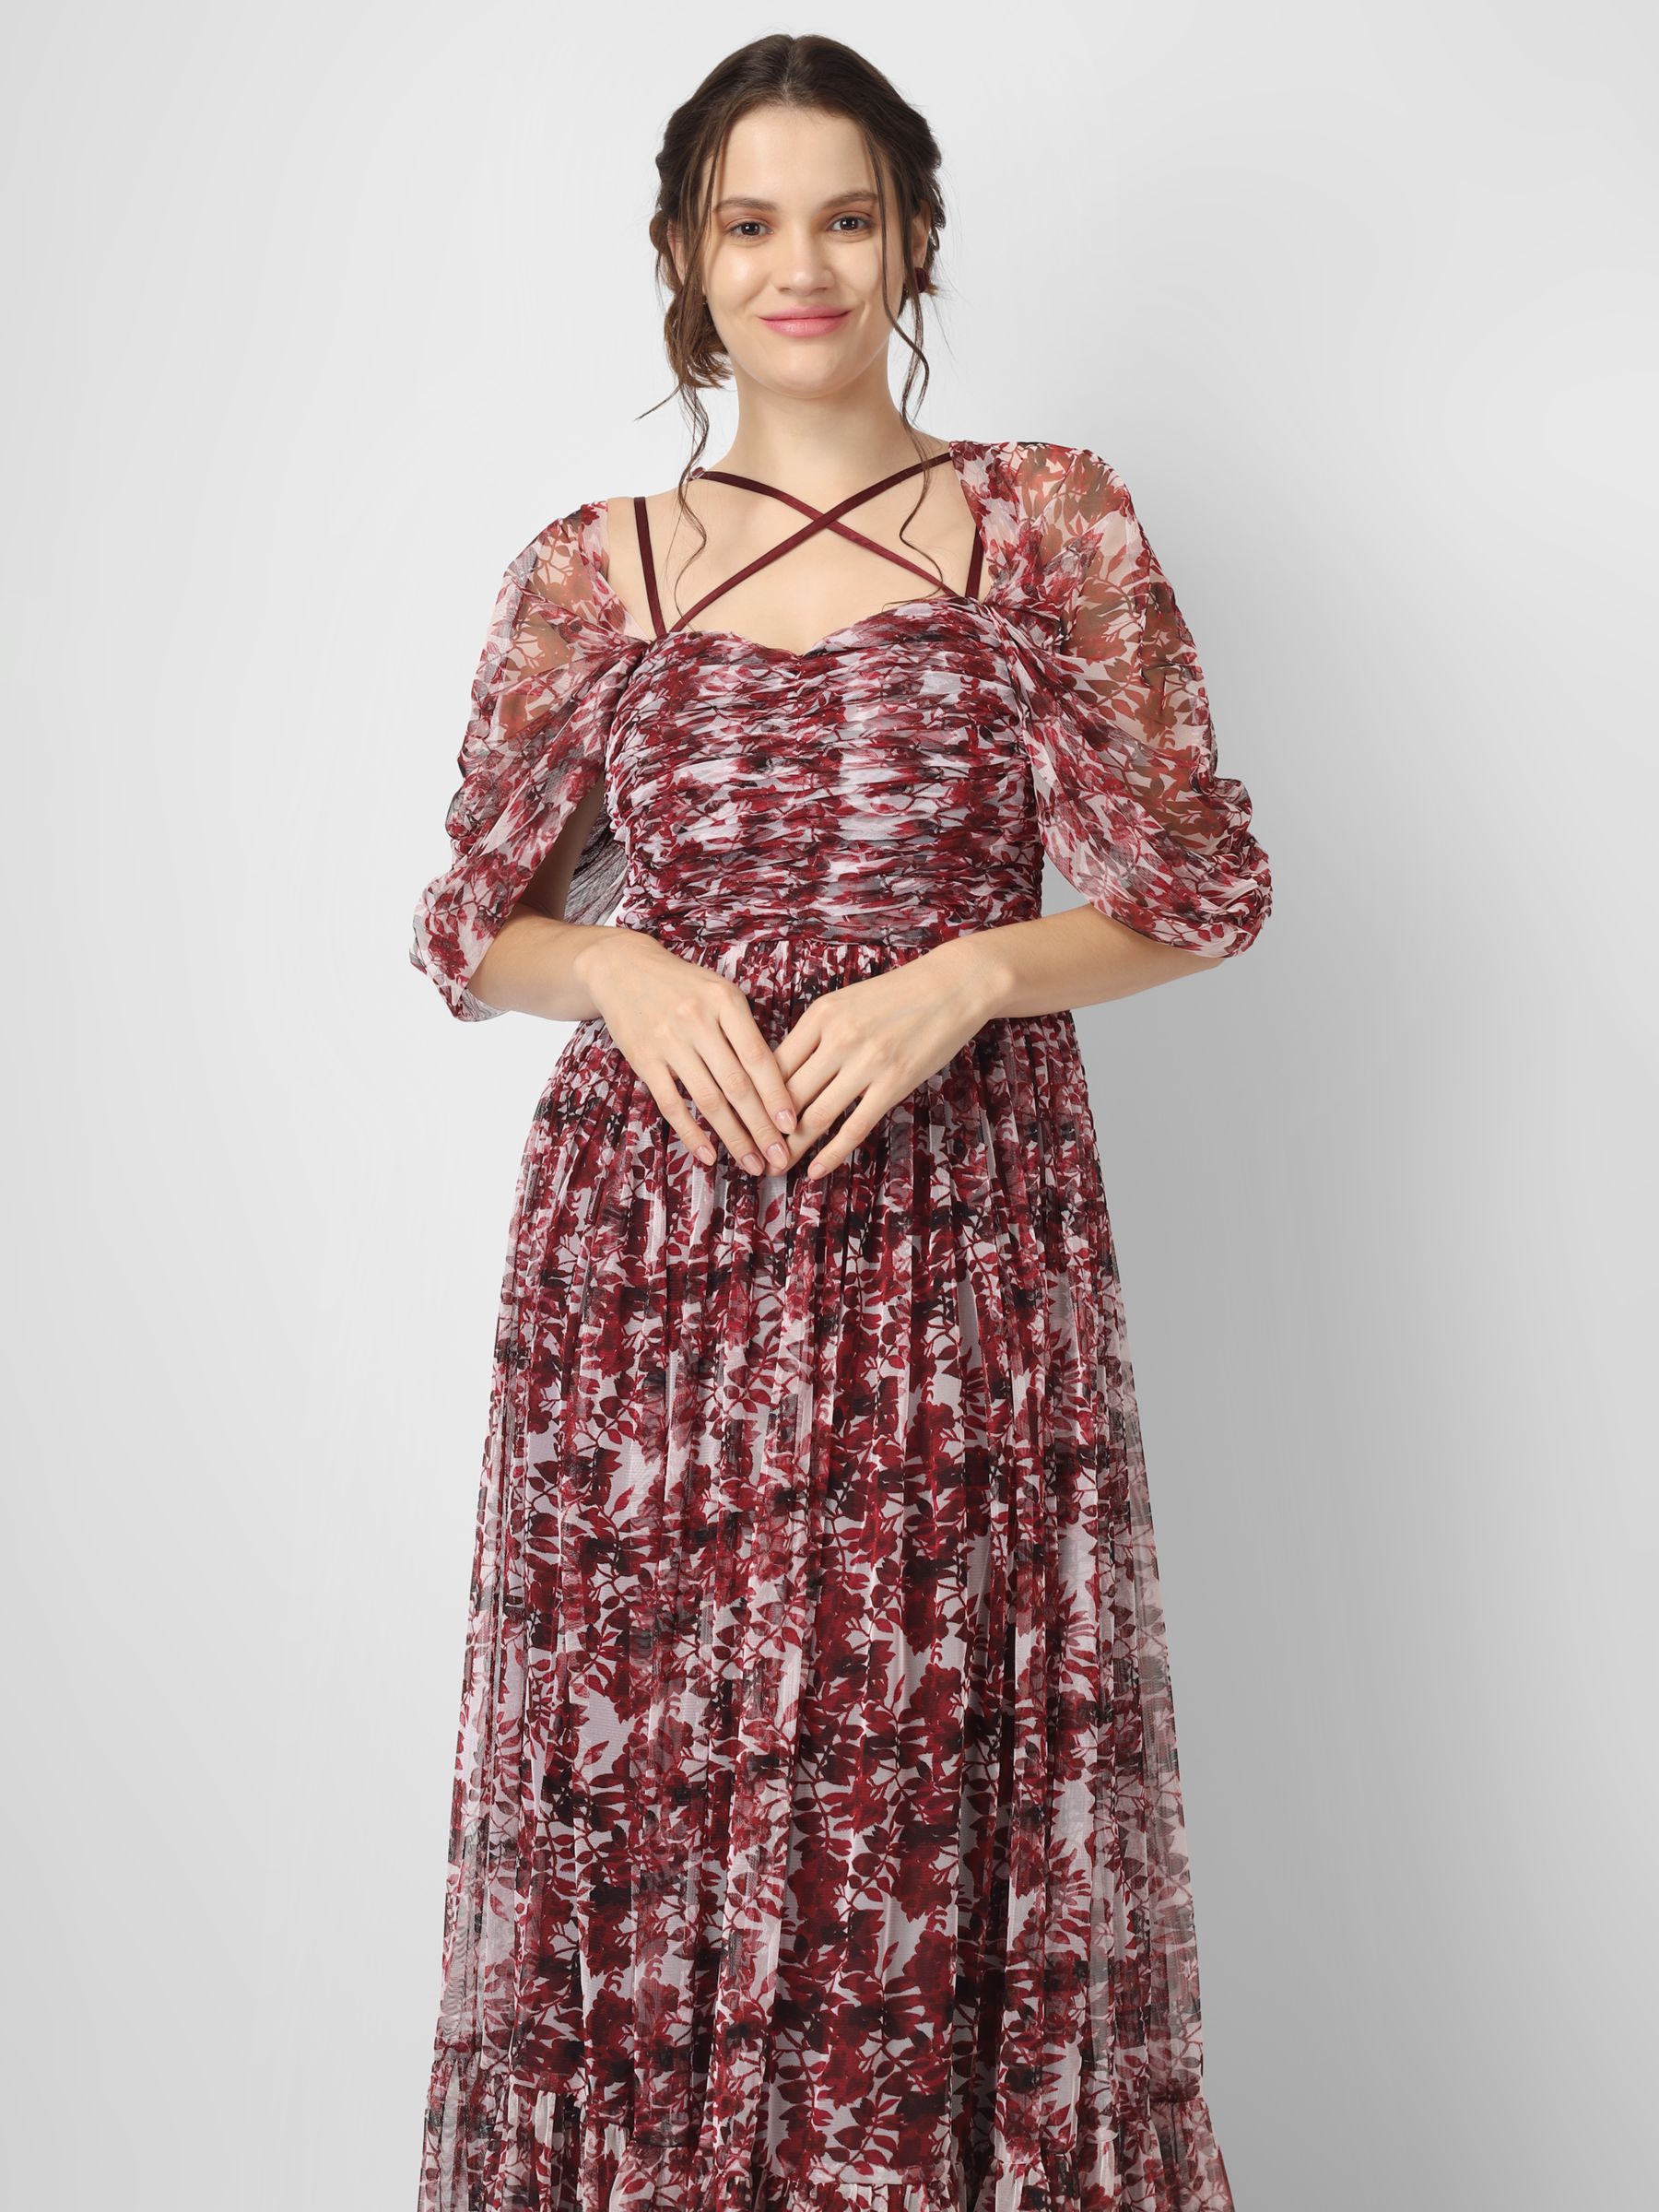 Buy Lace & Beads Alicia Cap Sleeve Maxi Dress, Burgundy Online at johnlewis.com